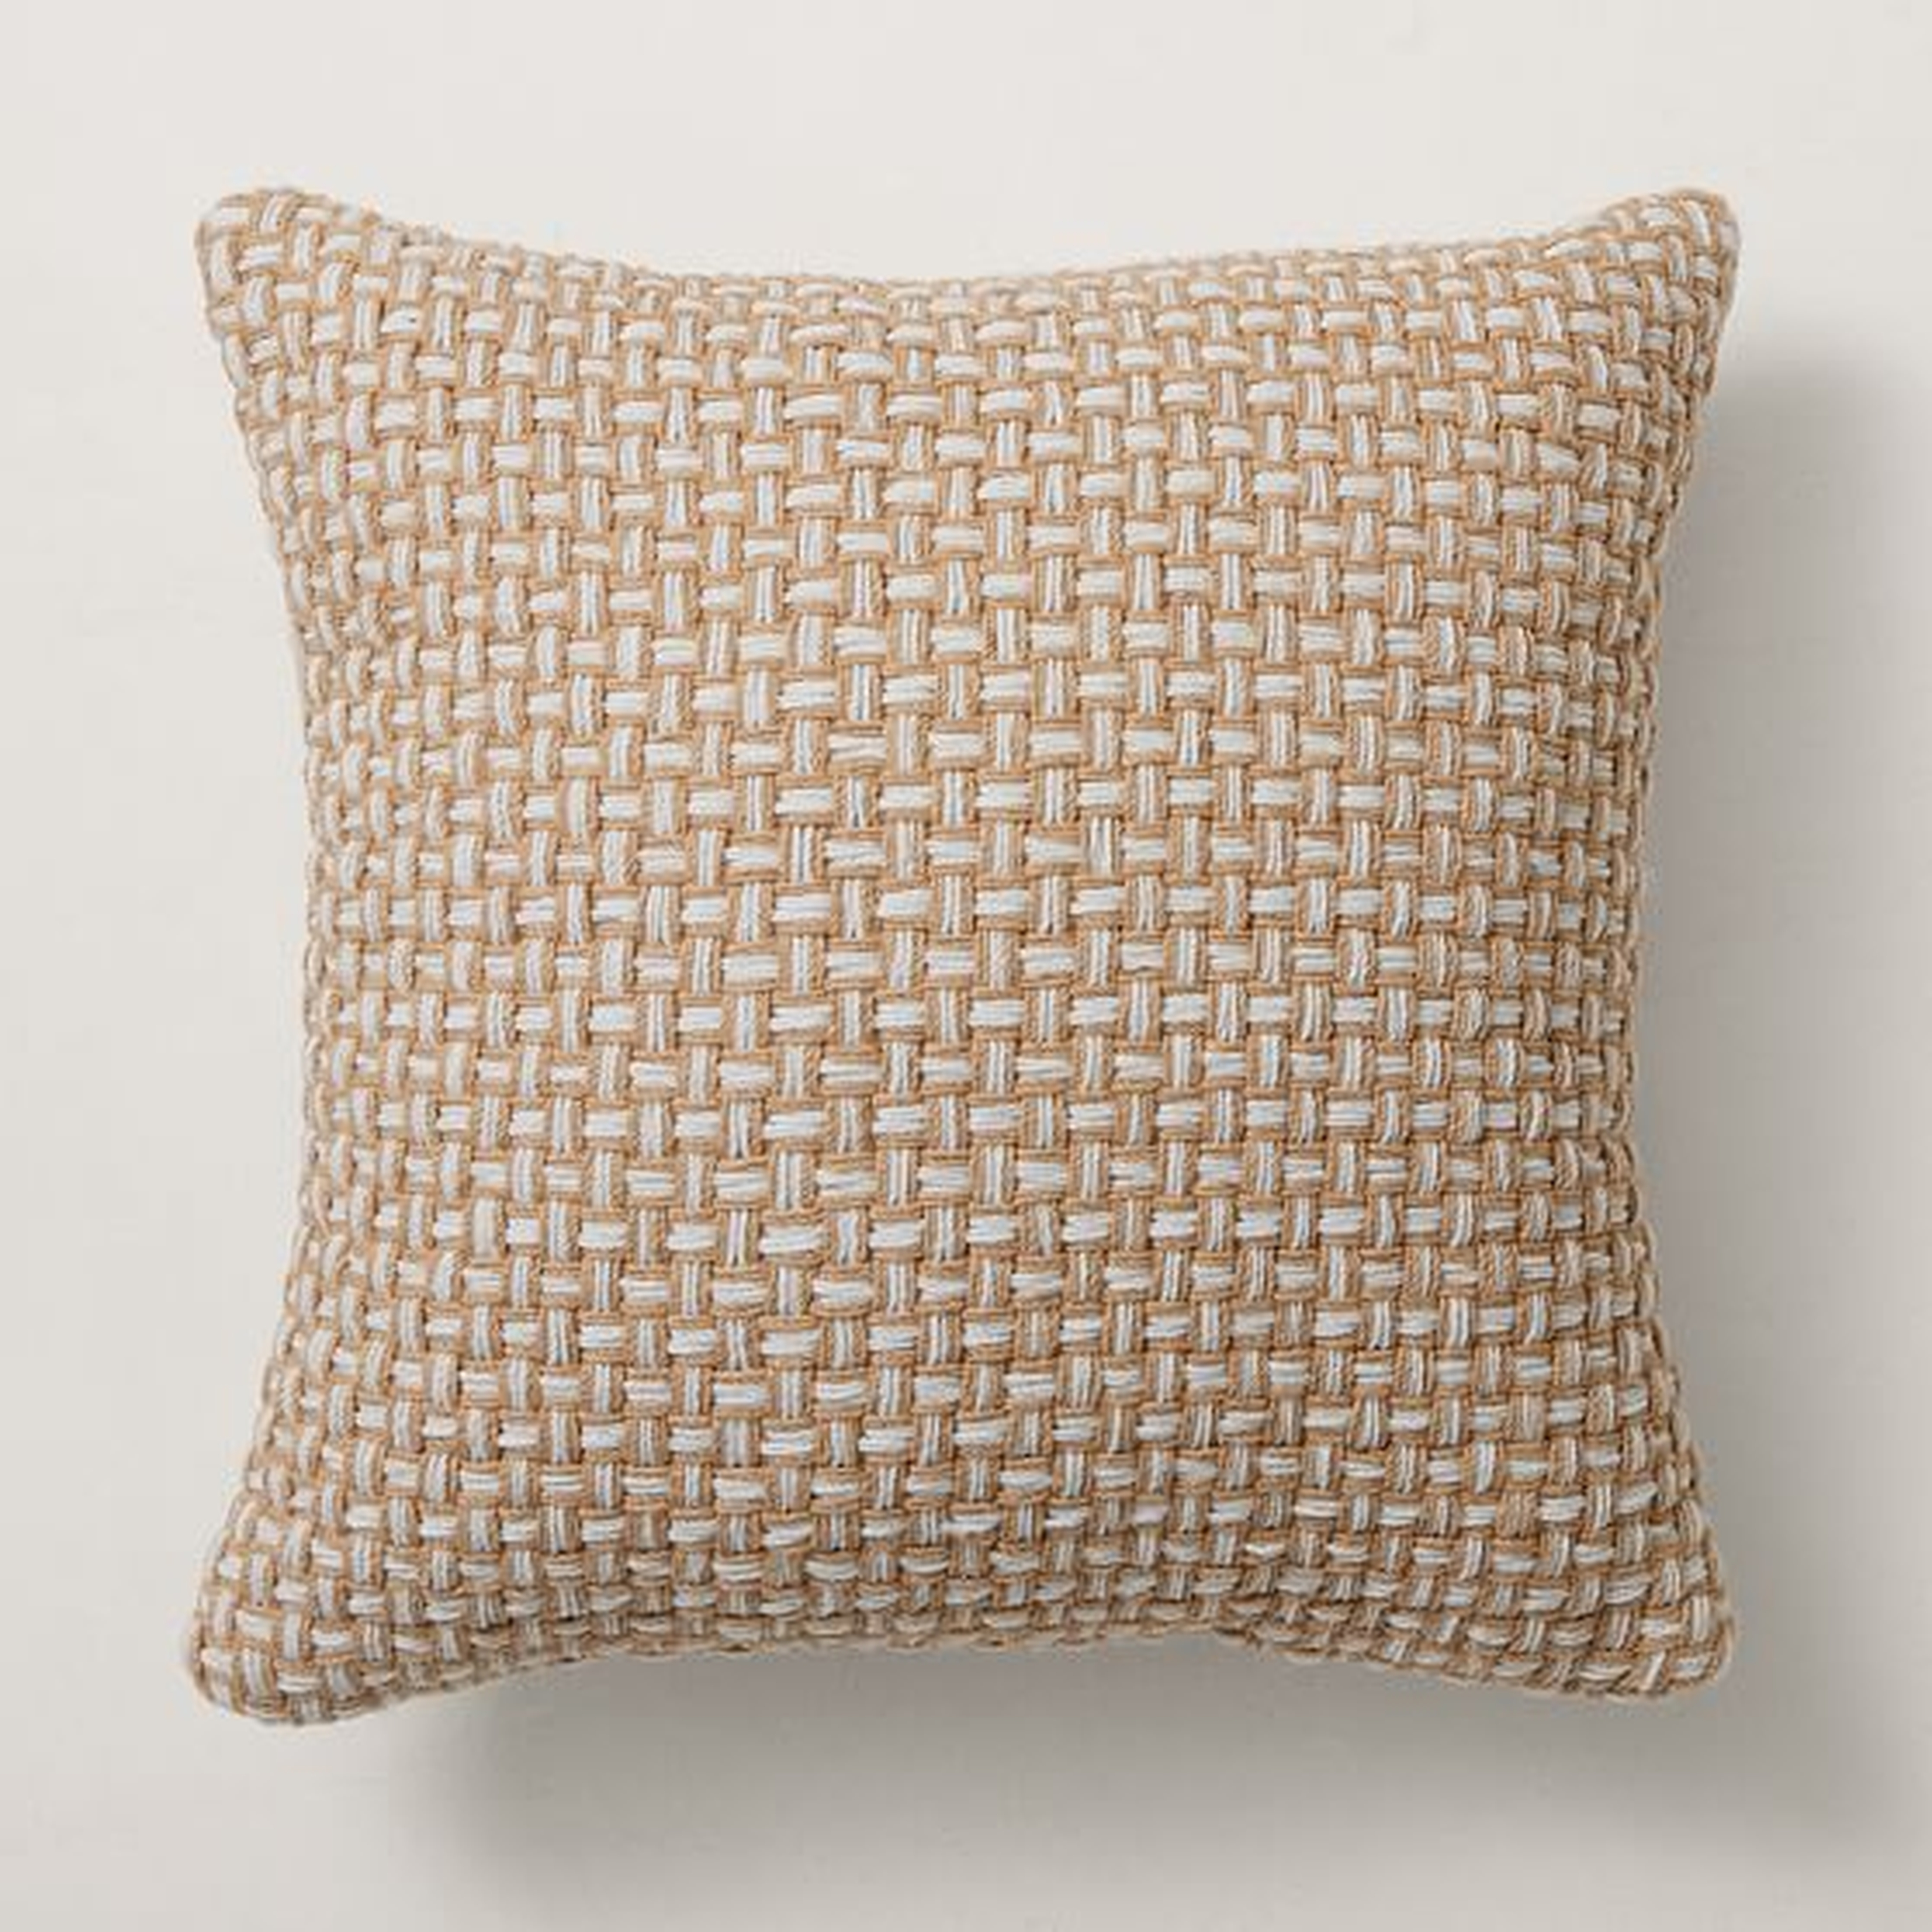 Outdoor Two Tone Woven Pillow, 20"x20", White - West Elm